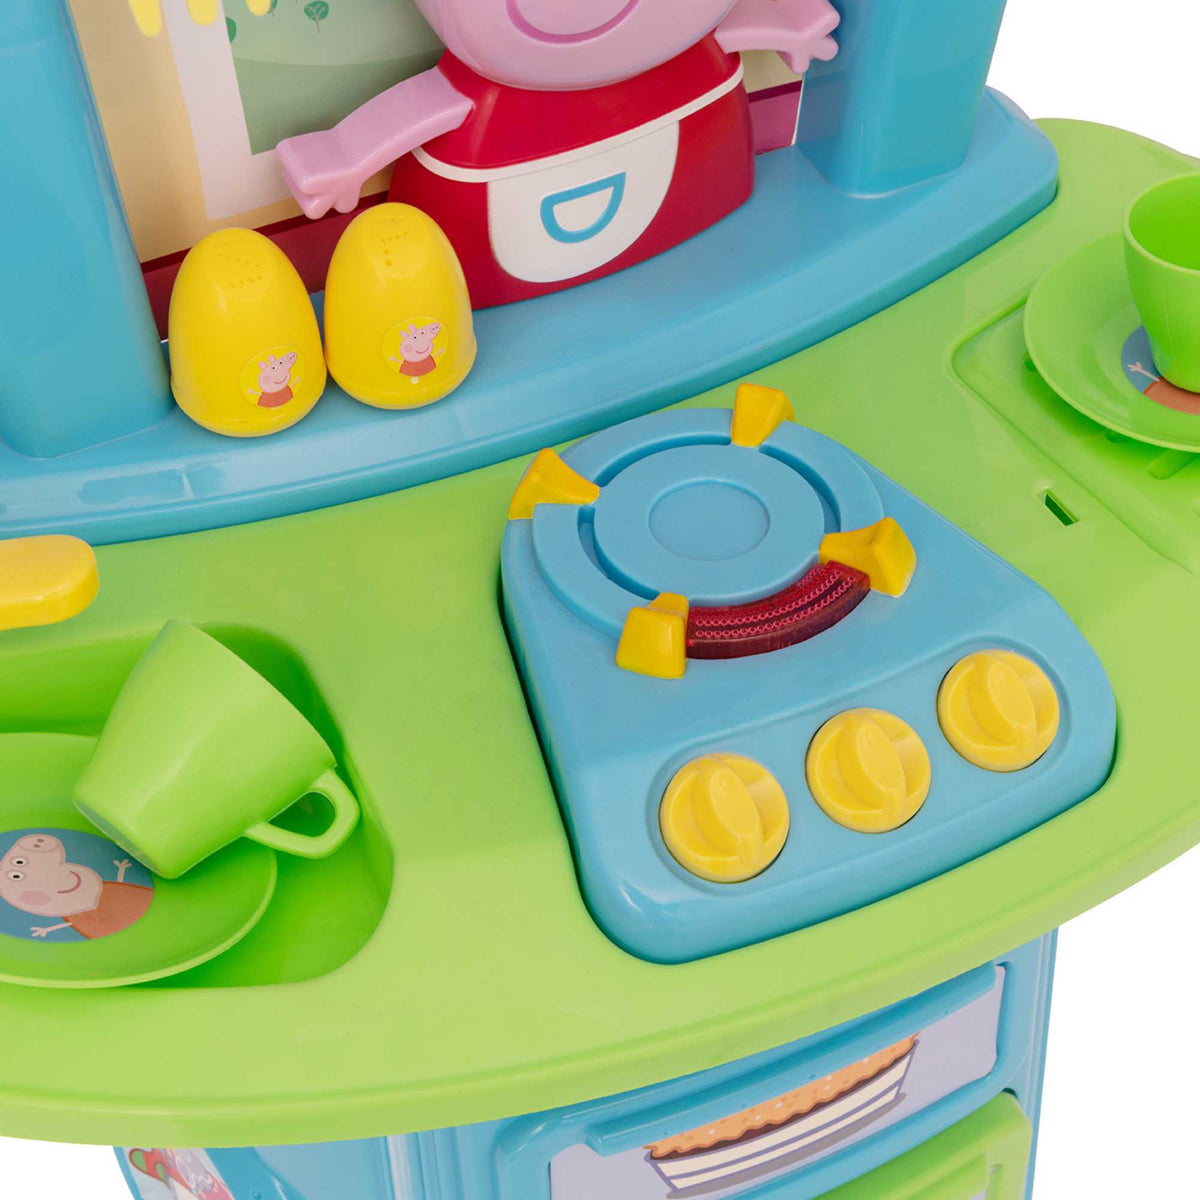 Peppa Pig My First Kitchen with 15 Accessories